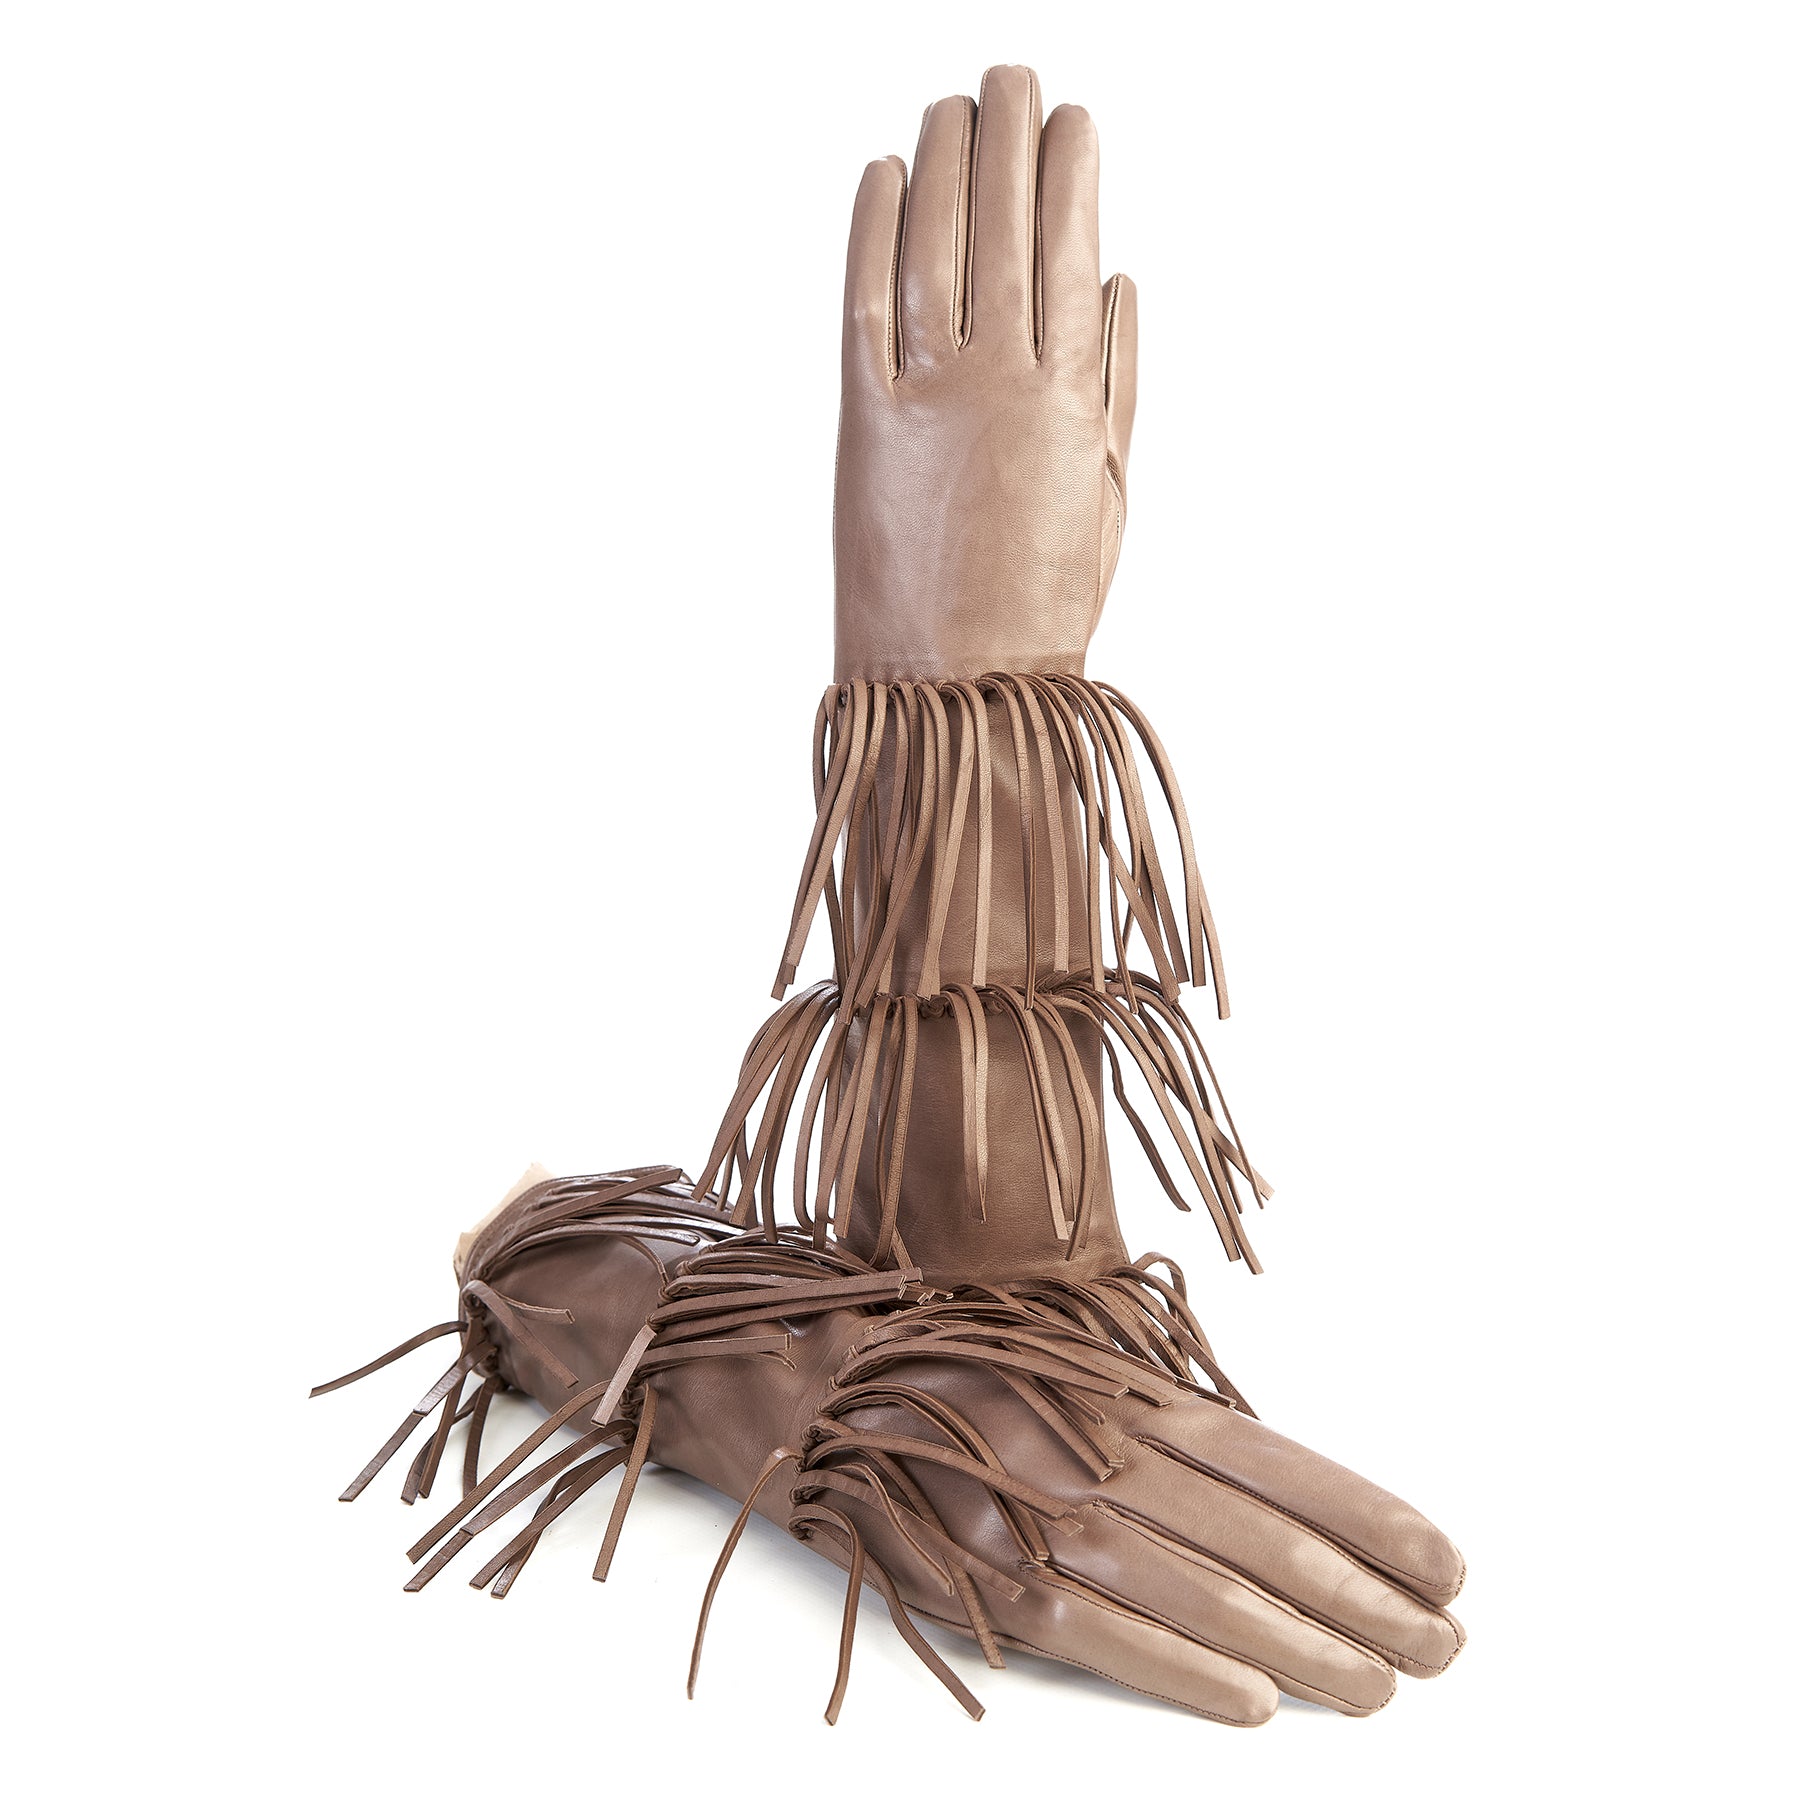 Women's leather gloves with fringes in colour tortora silk lined